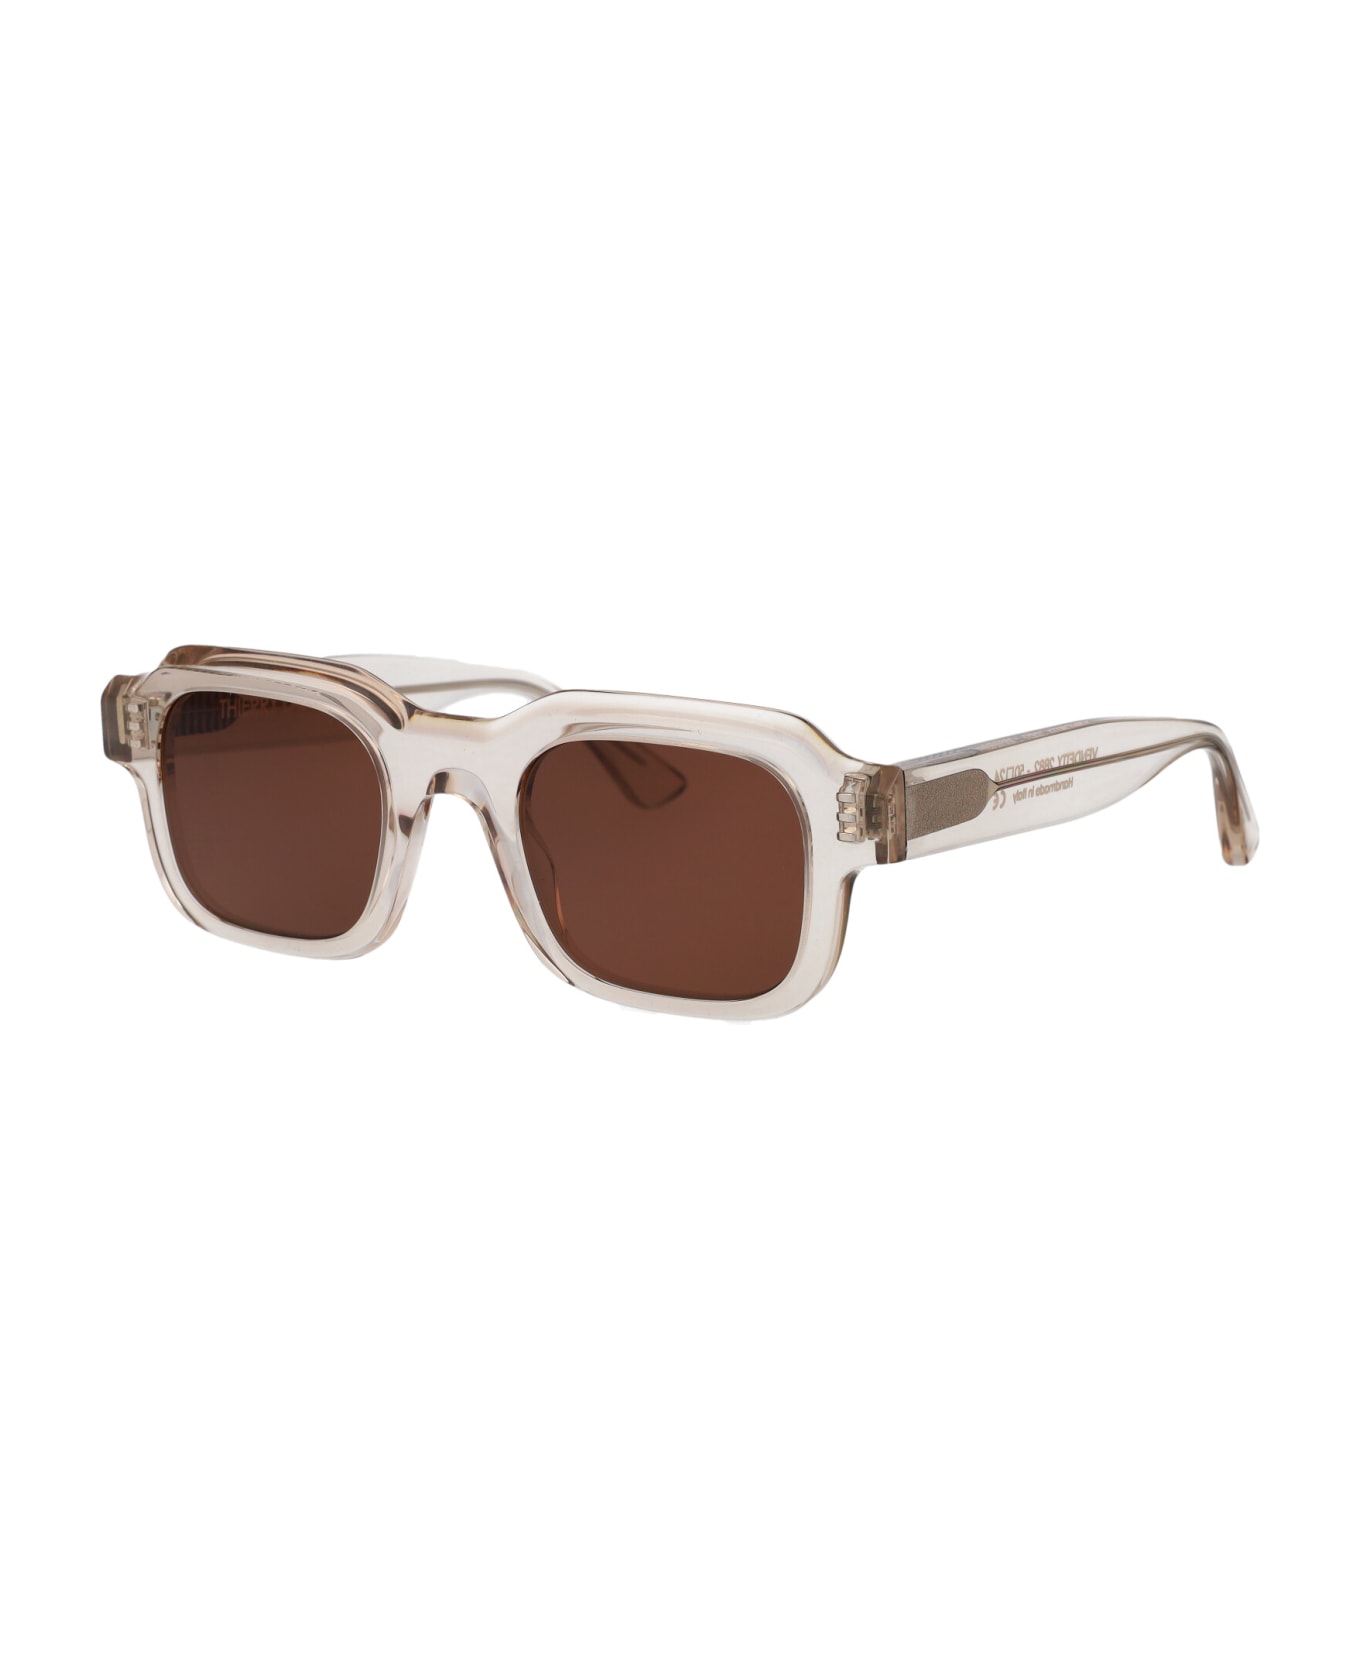 Thierry Lasry Vendetty Sunglasses - 2882 SAND